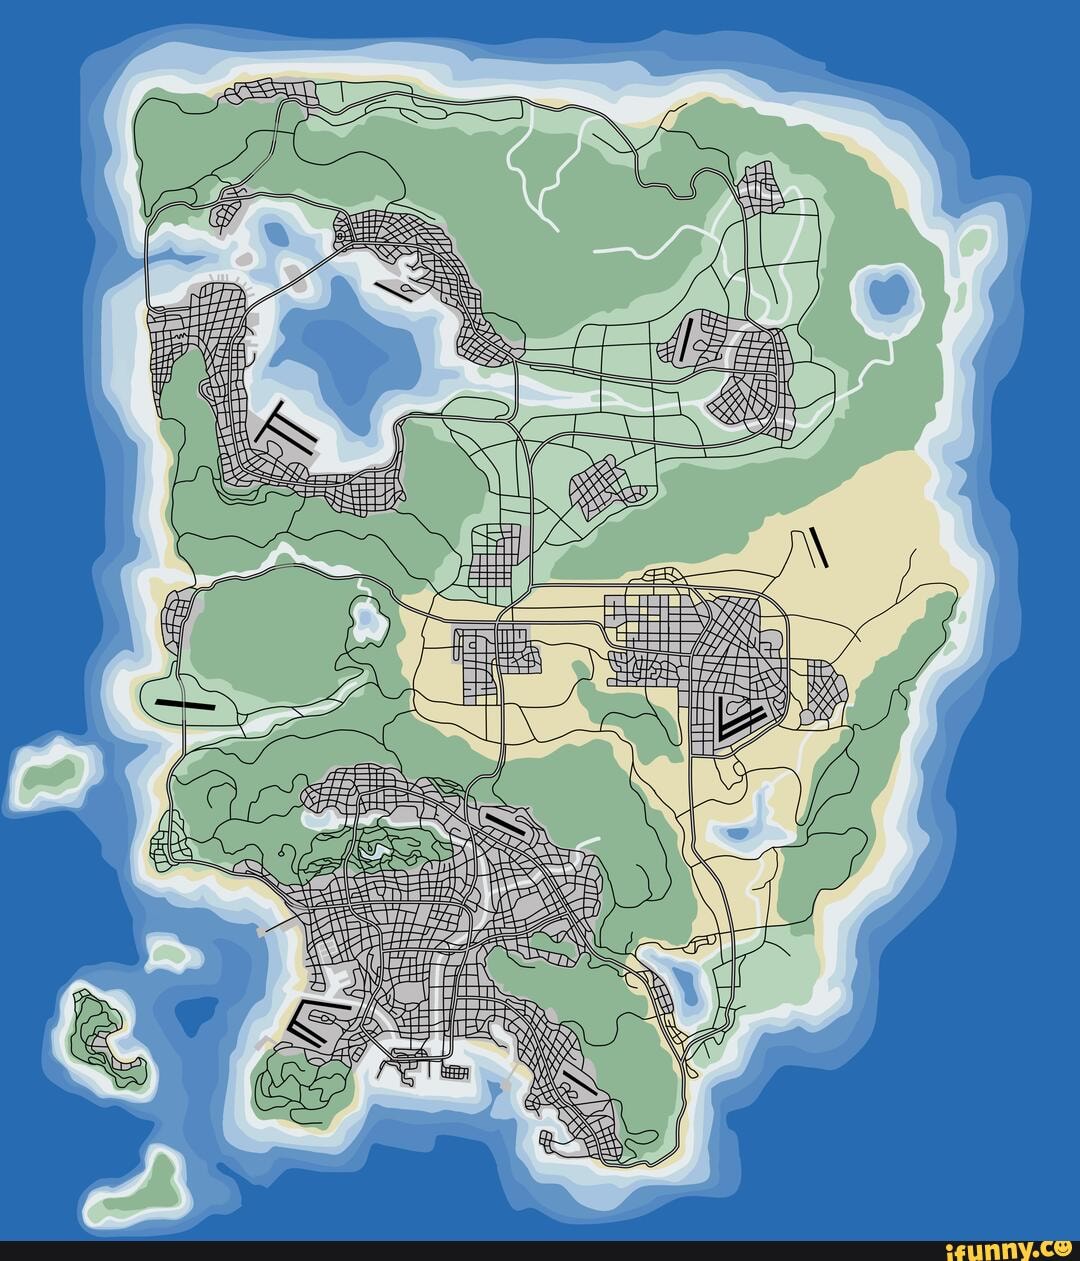 Reworked on my previous map of a conceptual state of San Andreas with ...